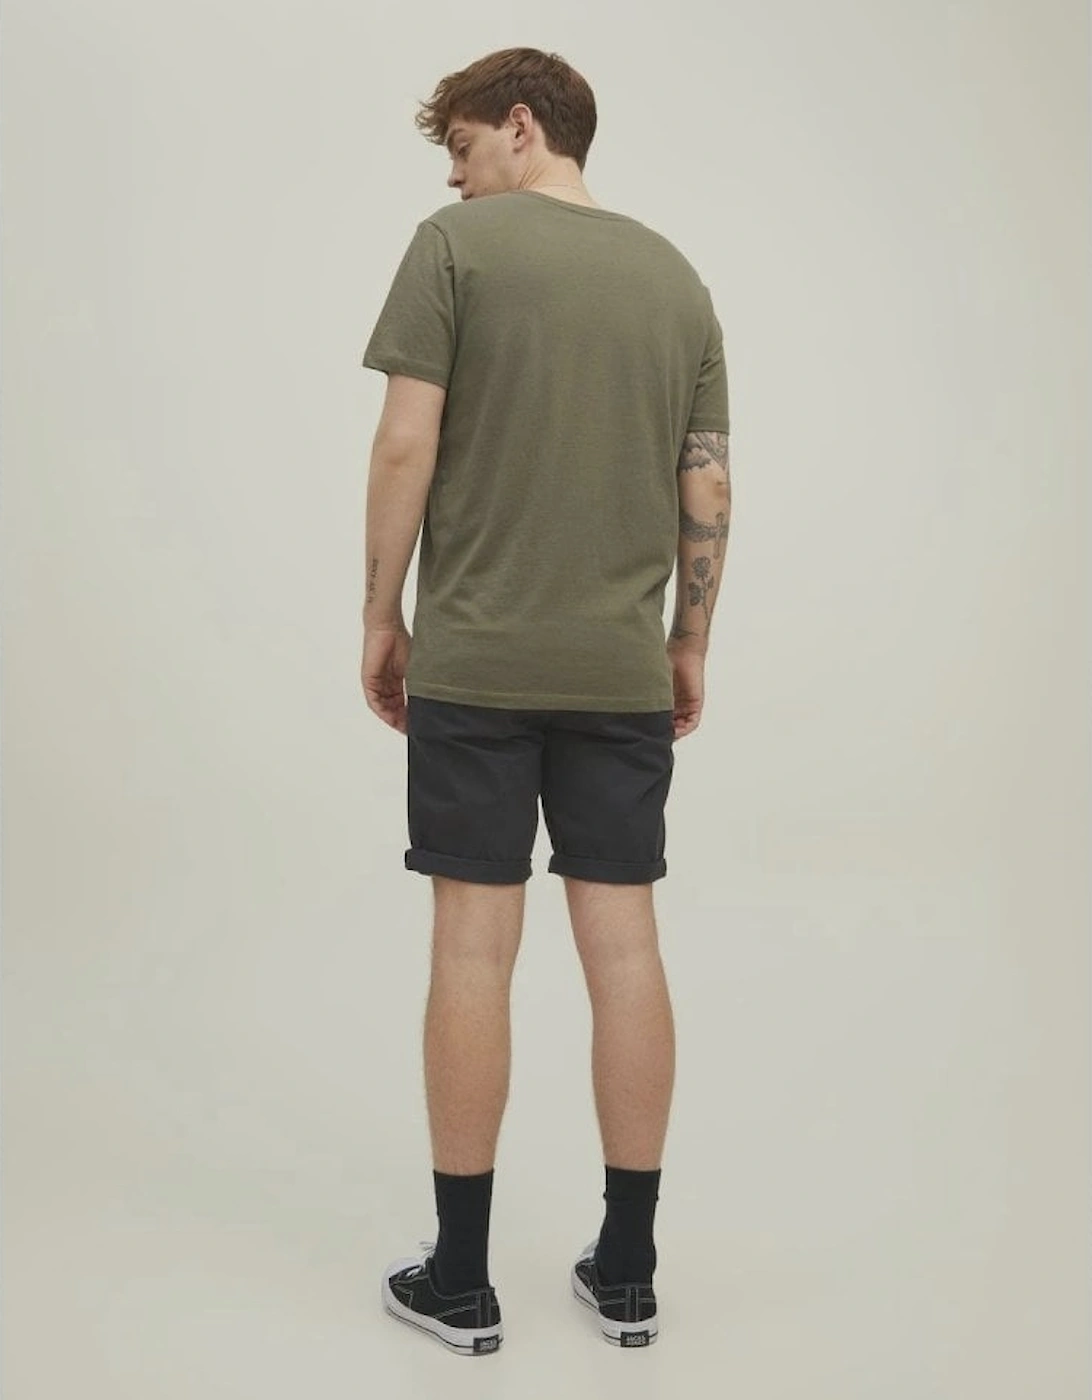 Bowie Chino Shorts - Black